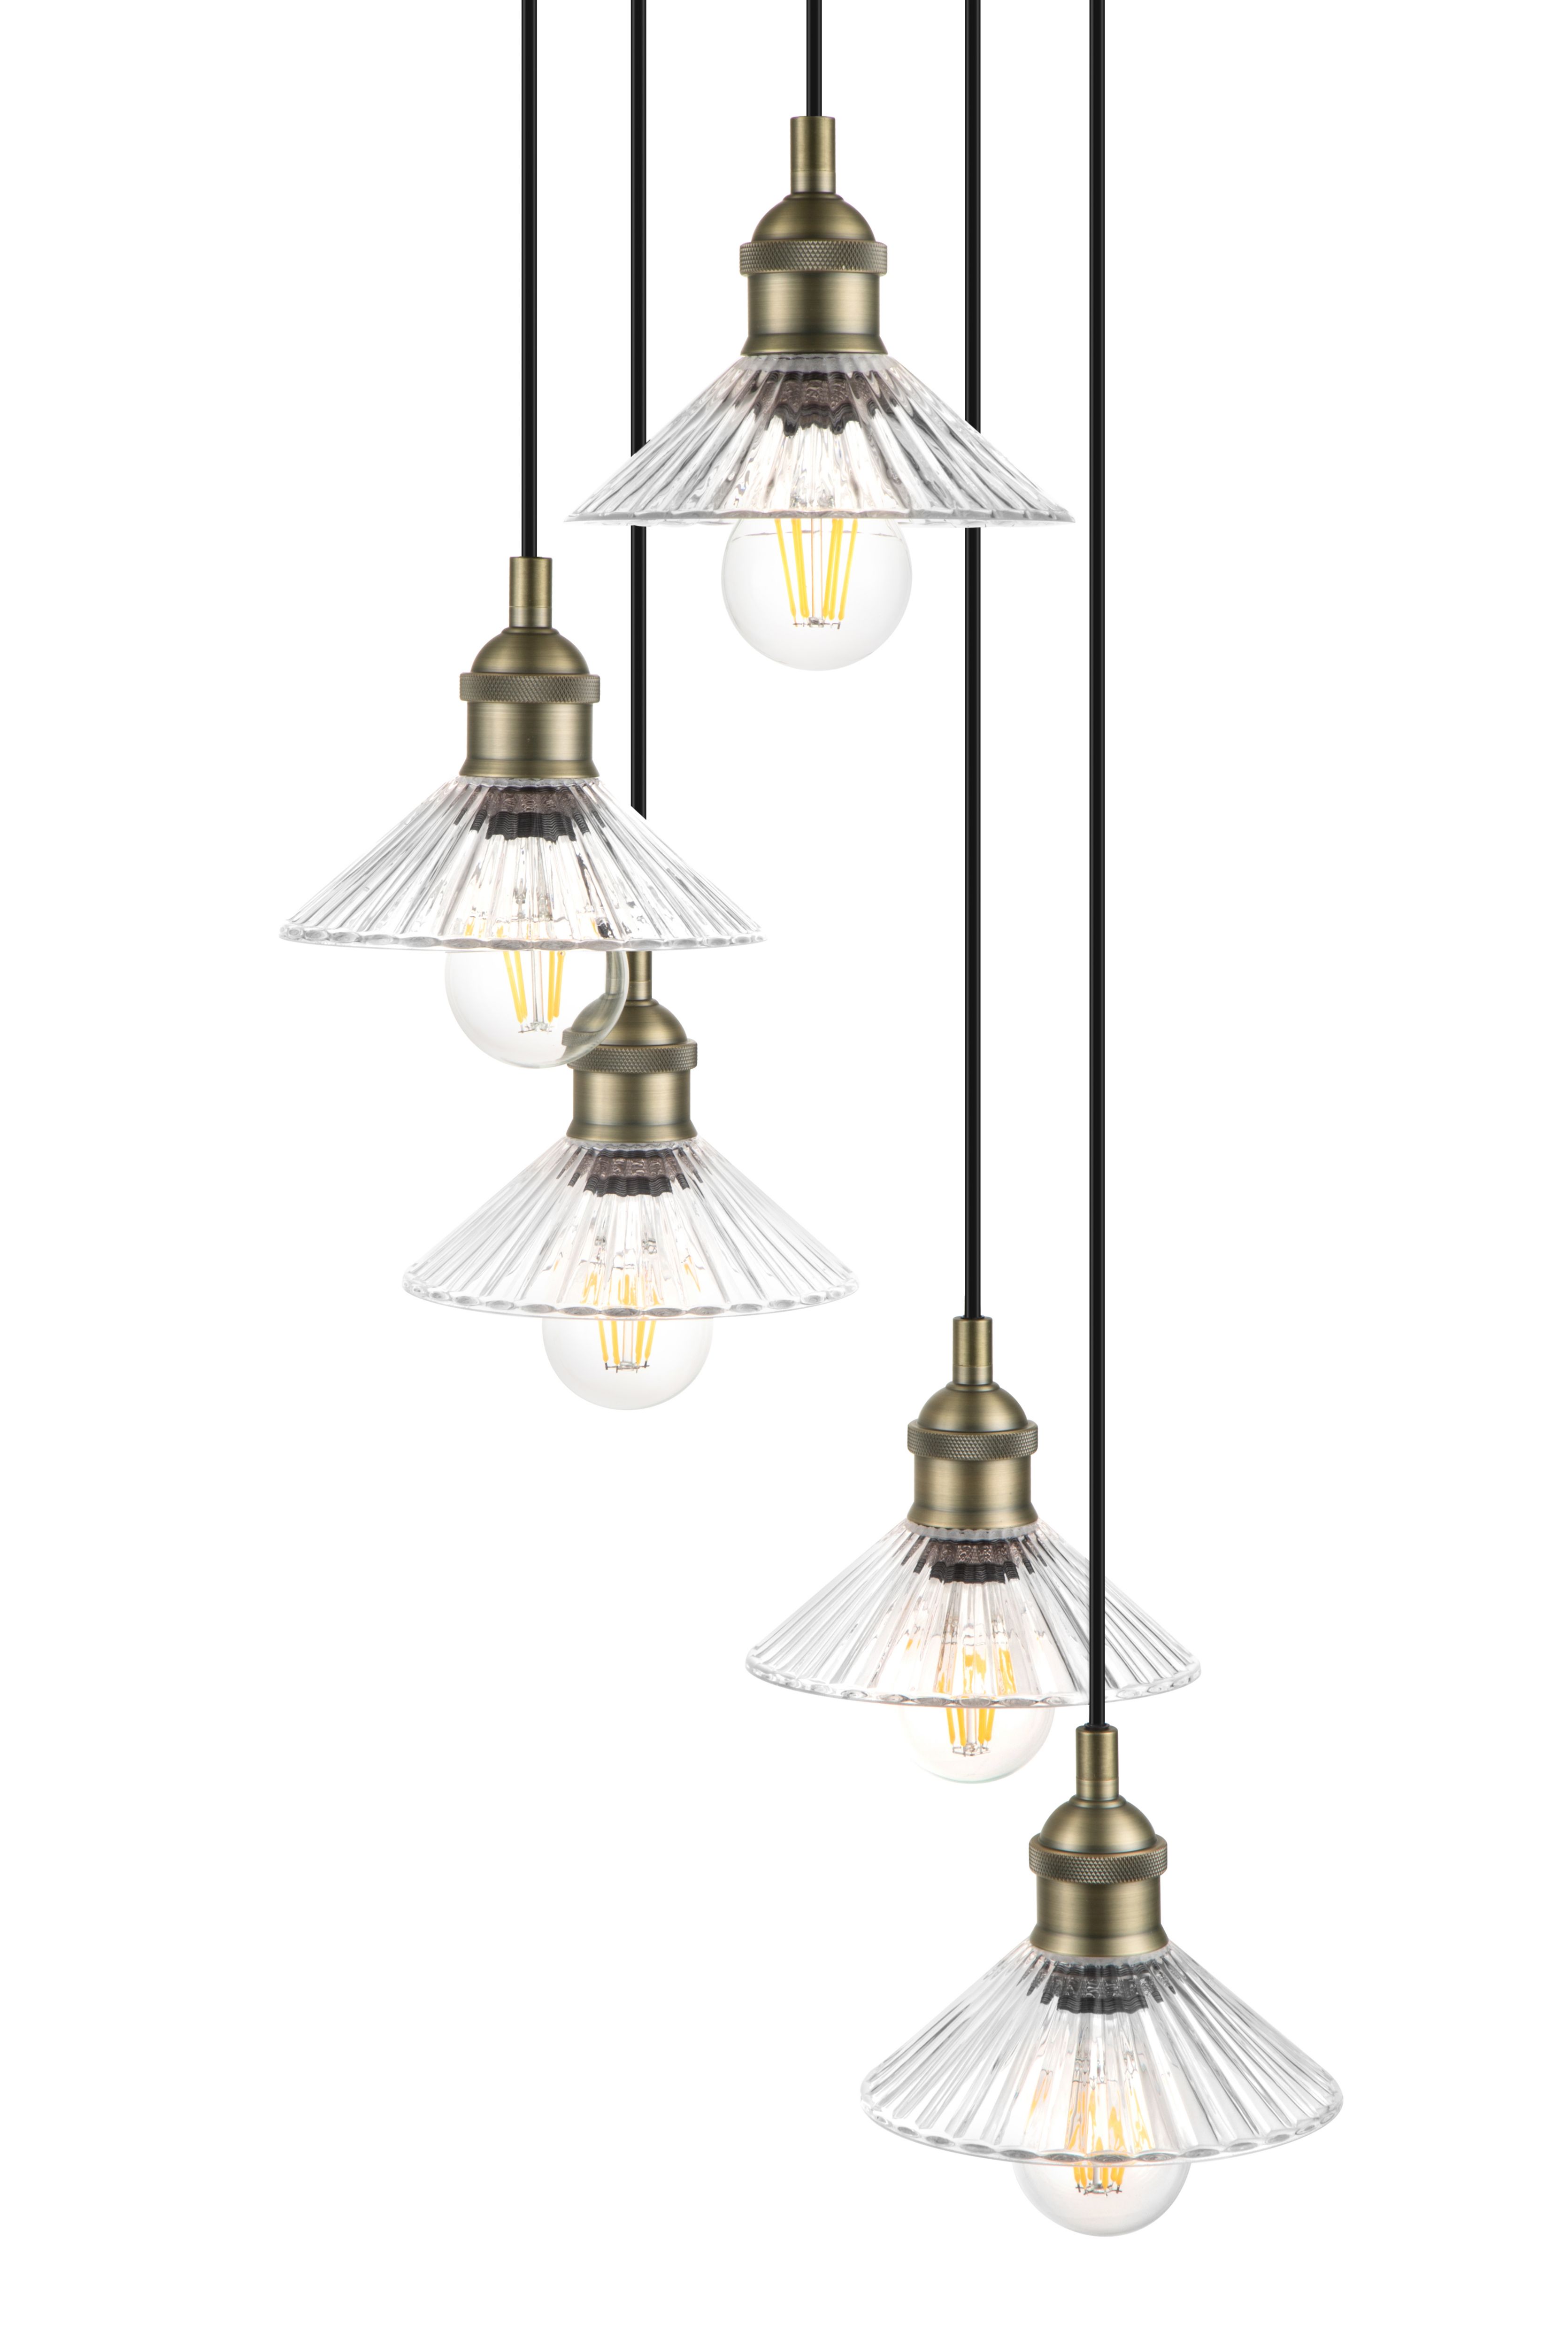 GoodHome Northwich Round Satin Pewter effect 5 Lamp LED Pendant ceiling light, (Dia)250mm